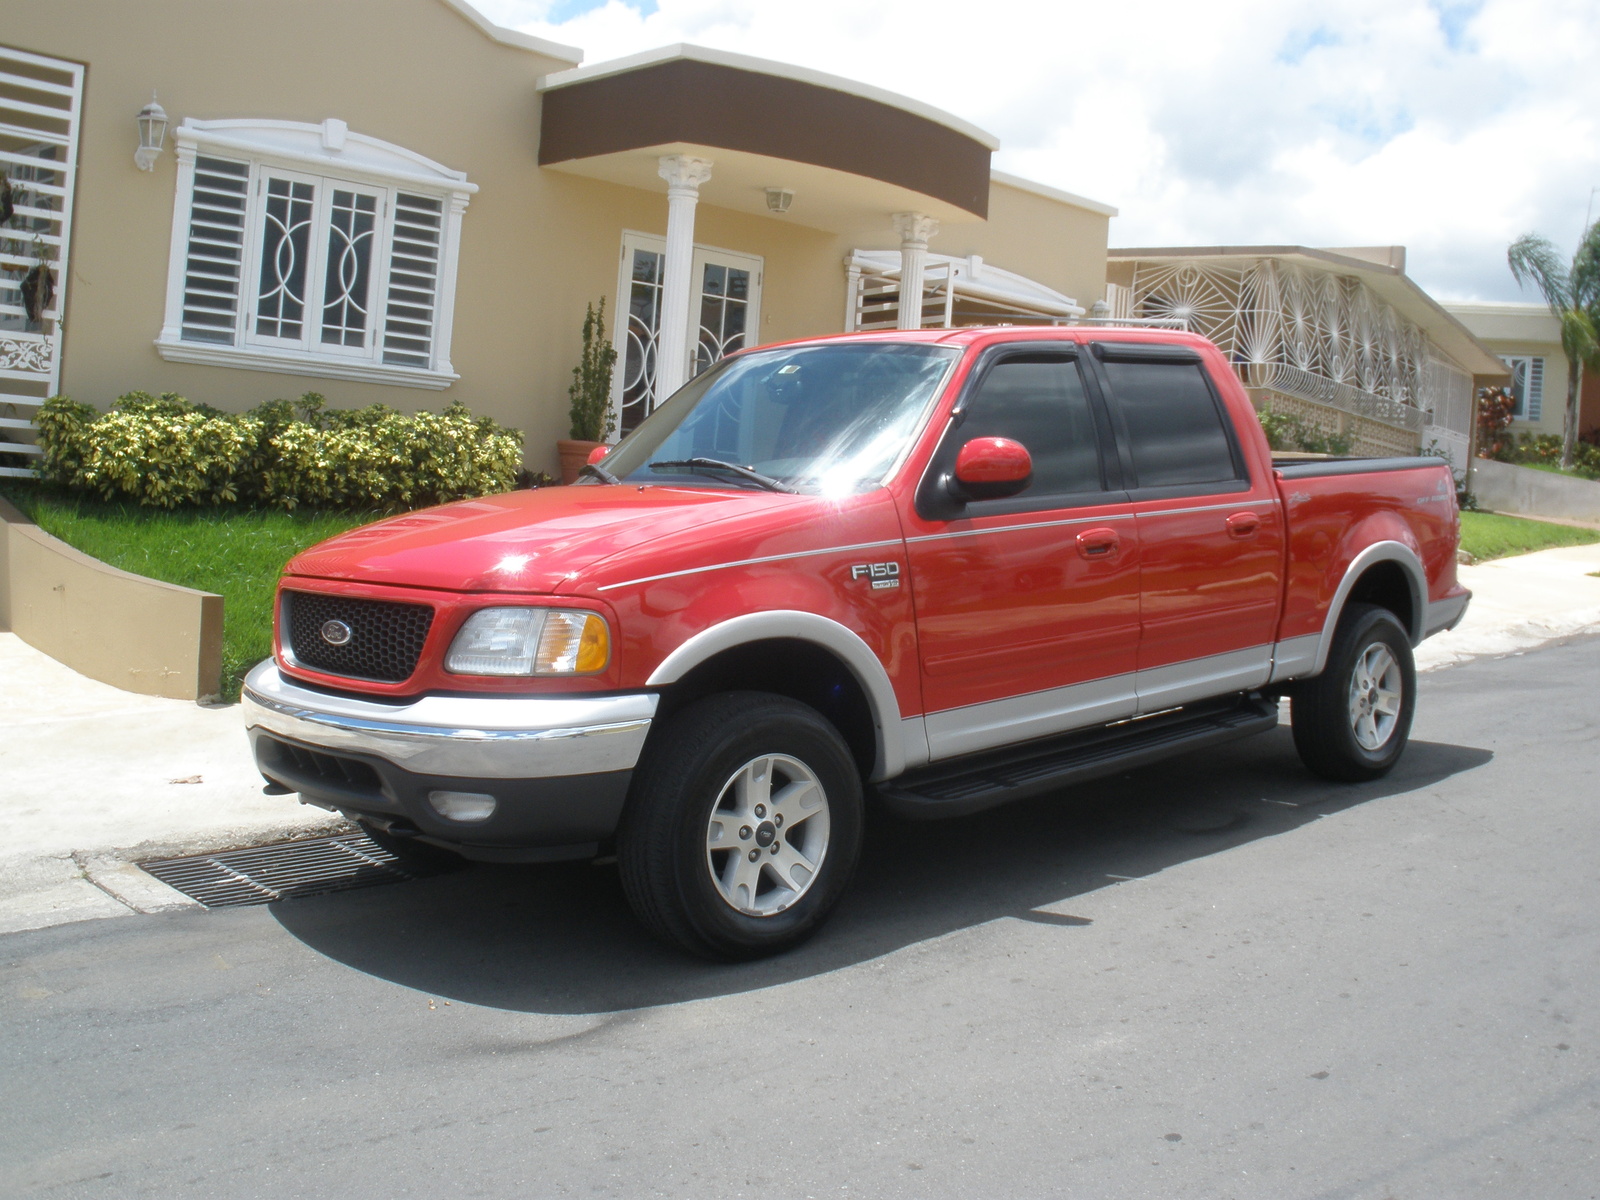 2003 Ford f150 for sale in canada #7